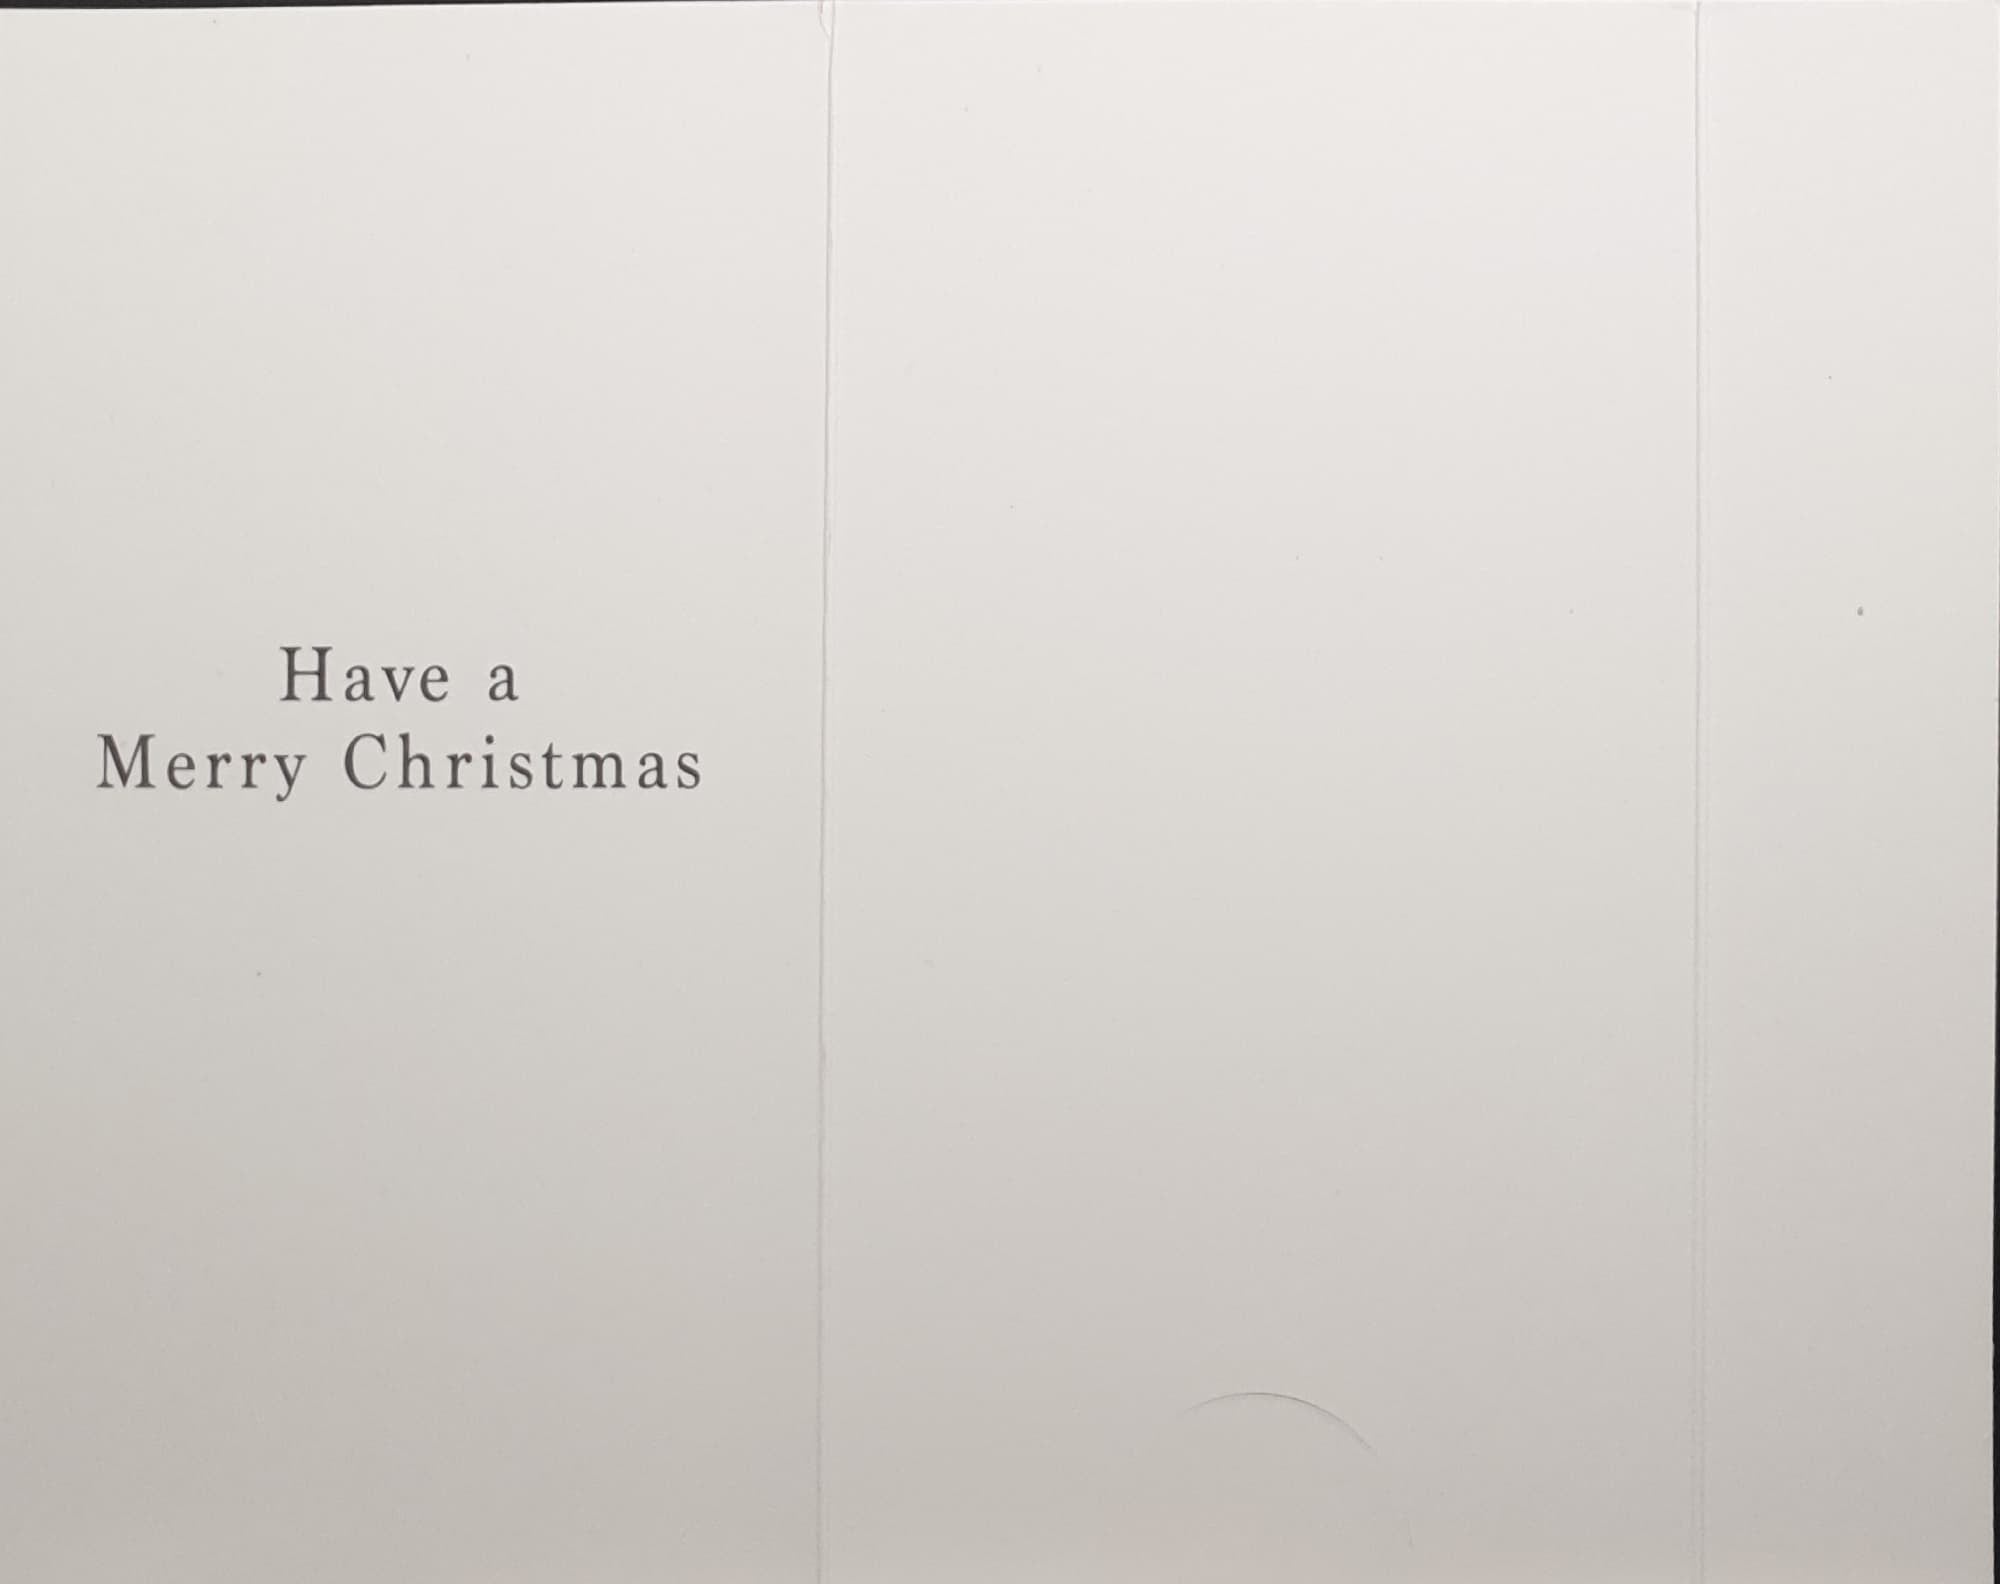 Money Wallet Christmas Card - A Gift For You / Santa Writing on List